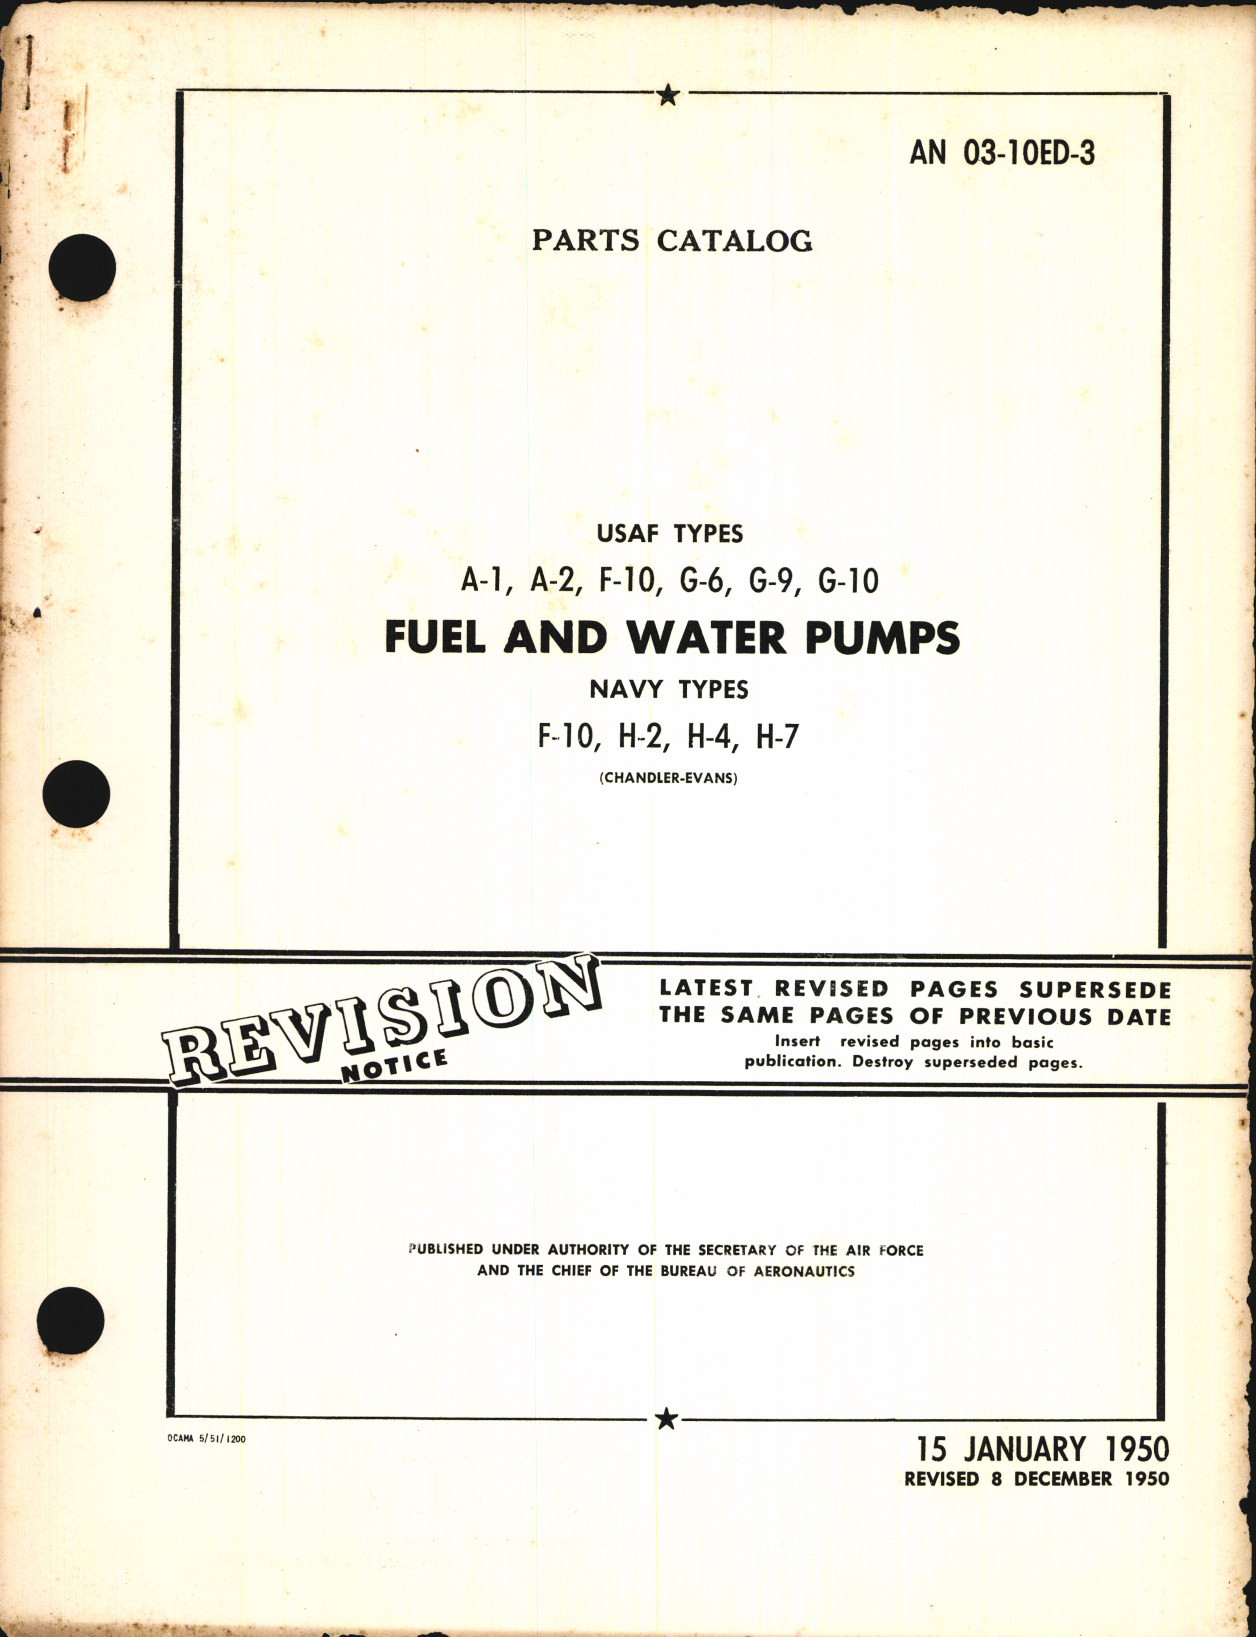 Sample page 1 from AirCorps Library document: Parts Catalog for Fuel and Water Pumps